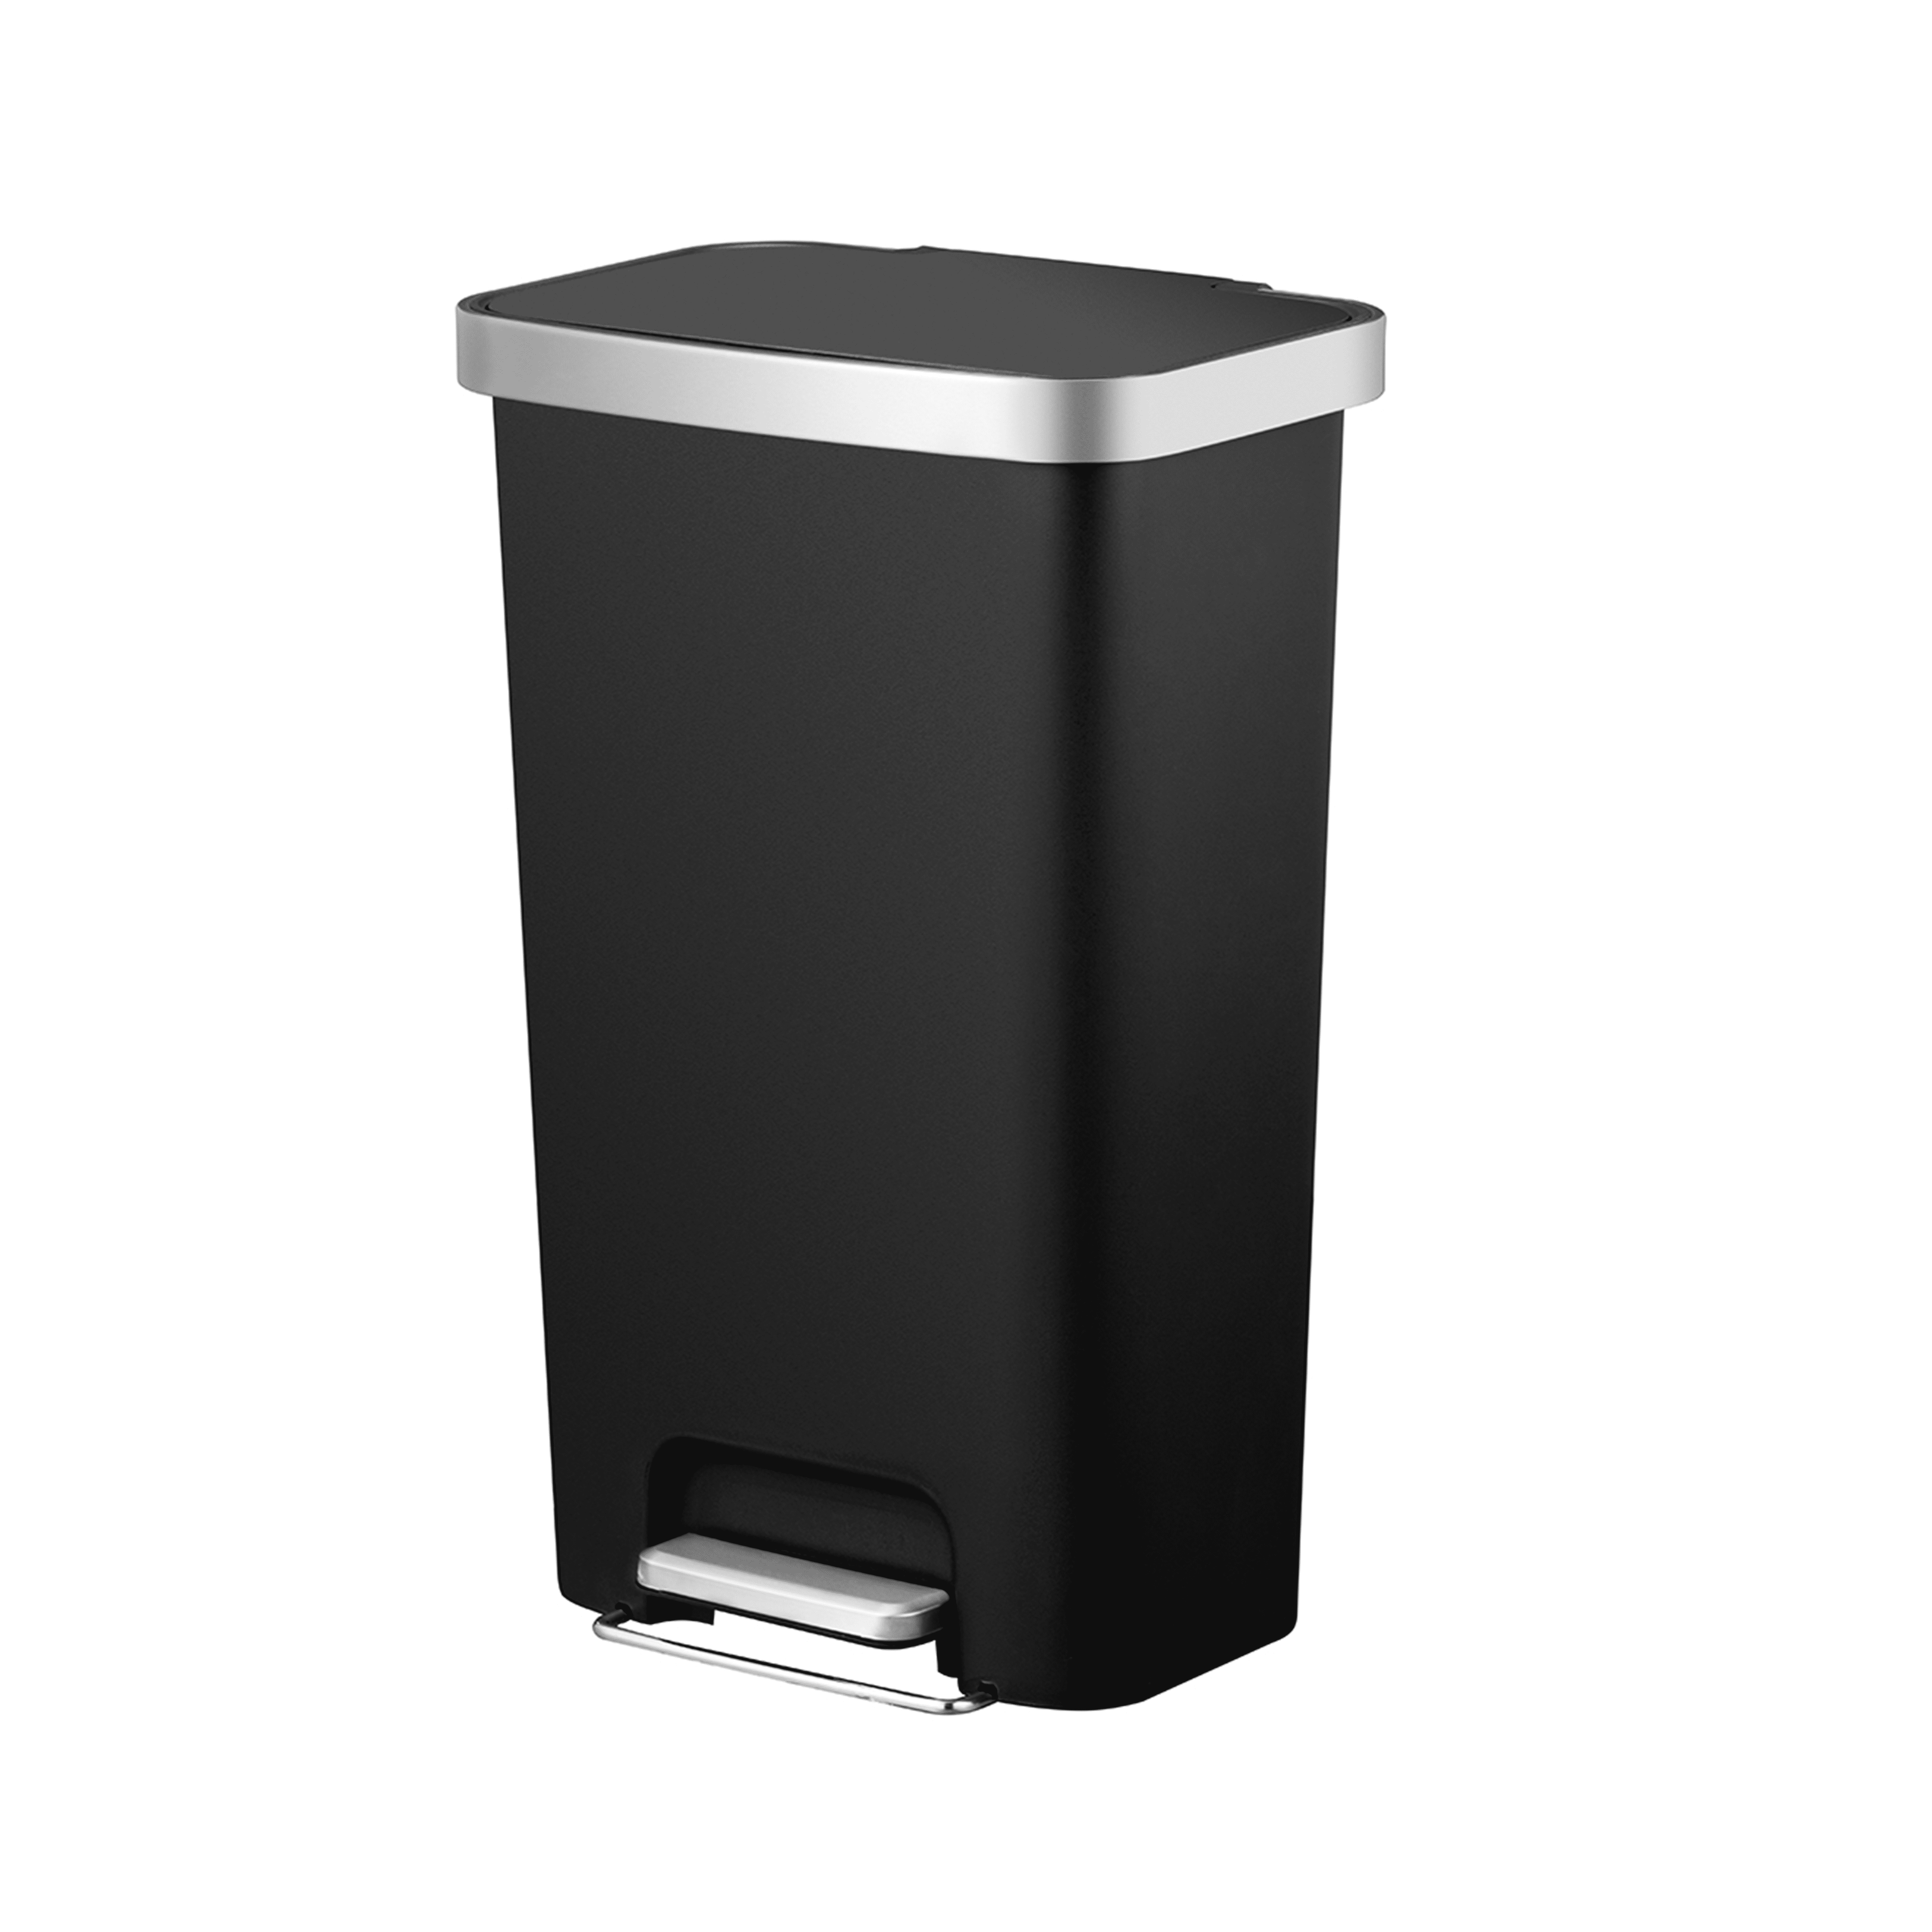 Replacing Your Simplehuman Garbage Bags for Trash Bins, 30L / 8 Gallon,  Style-G 